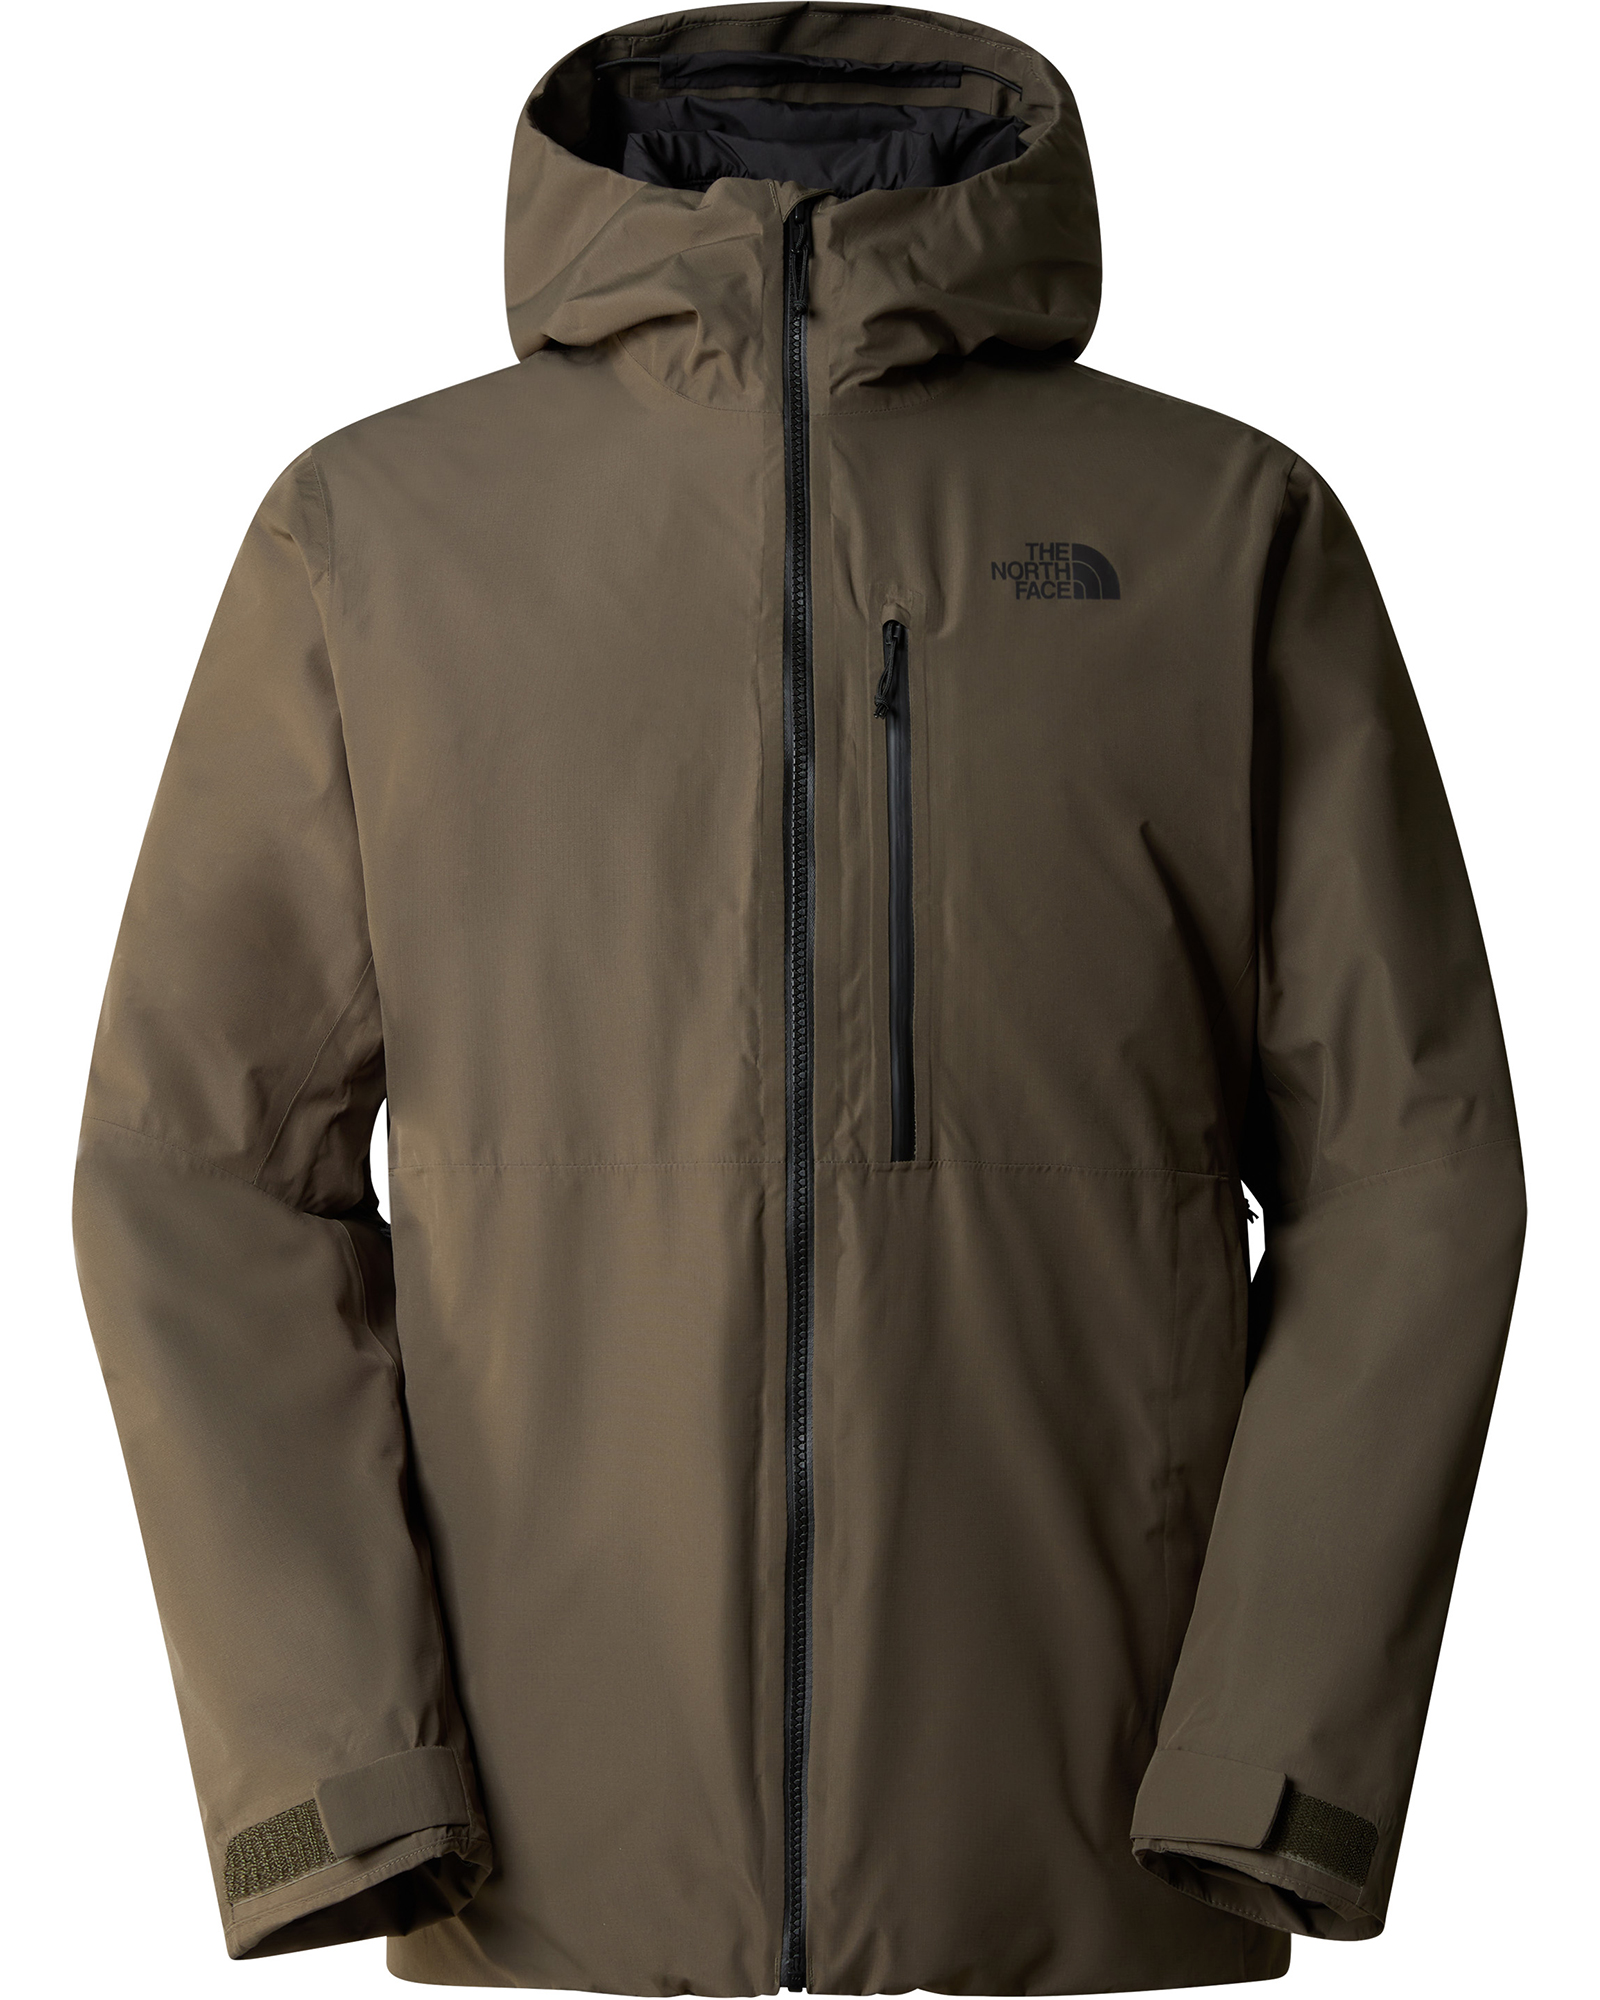 The North Face Men’s North Table Down Triclimate Jacket - New Taupe Green-TNF Black M